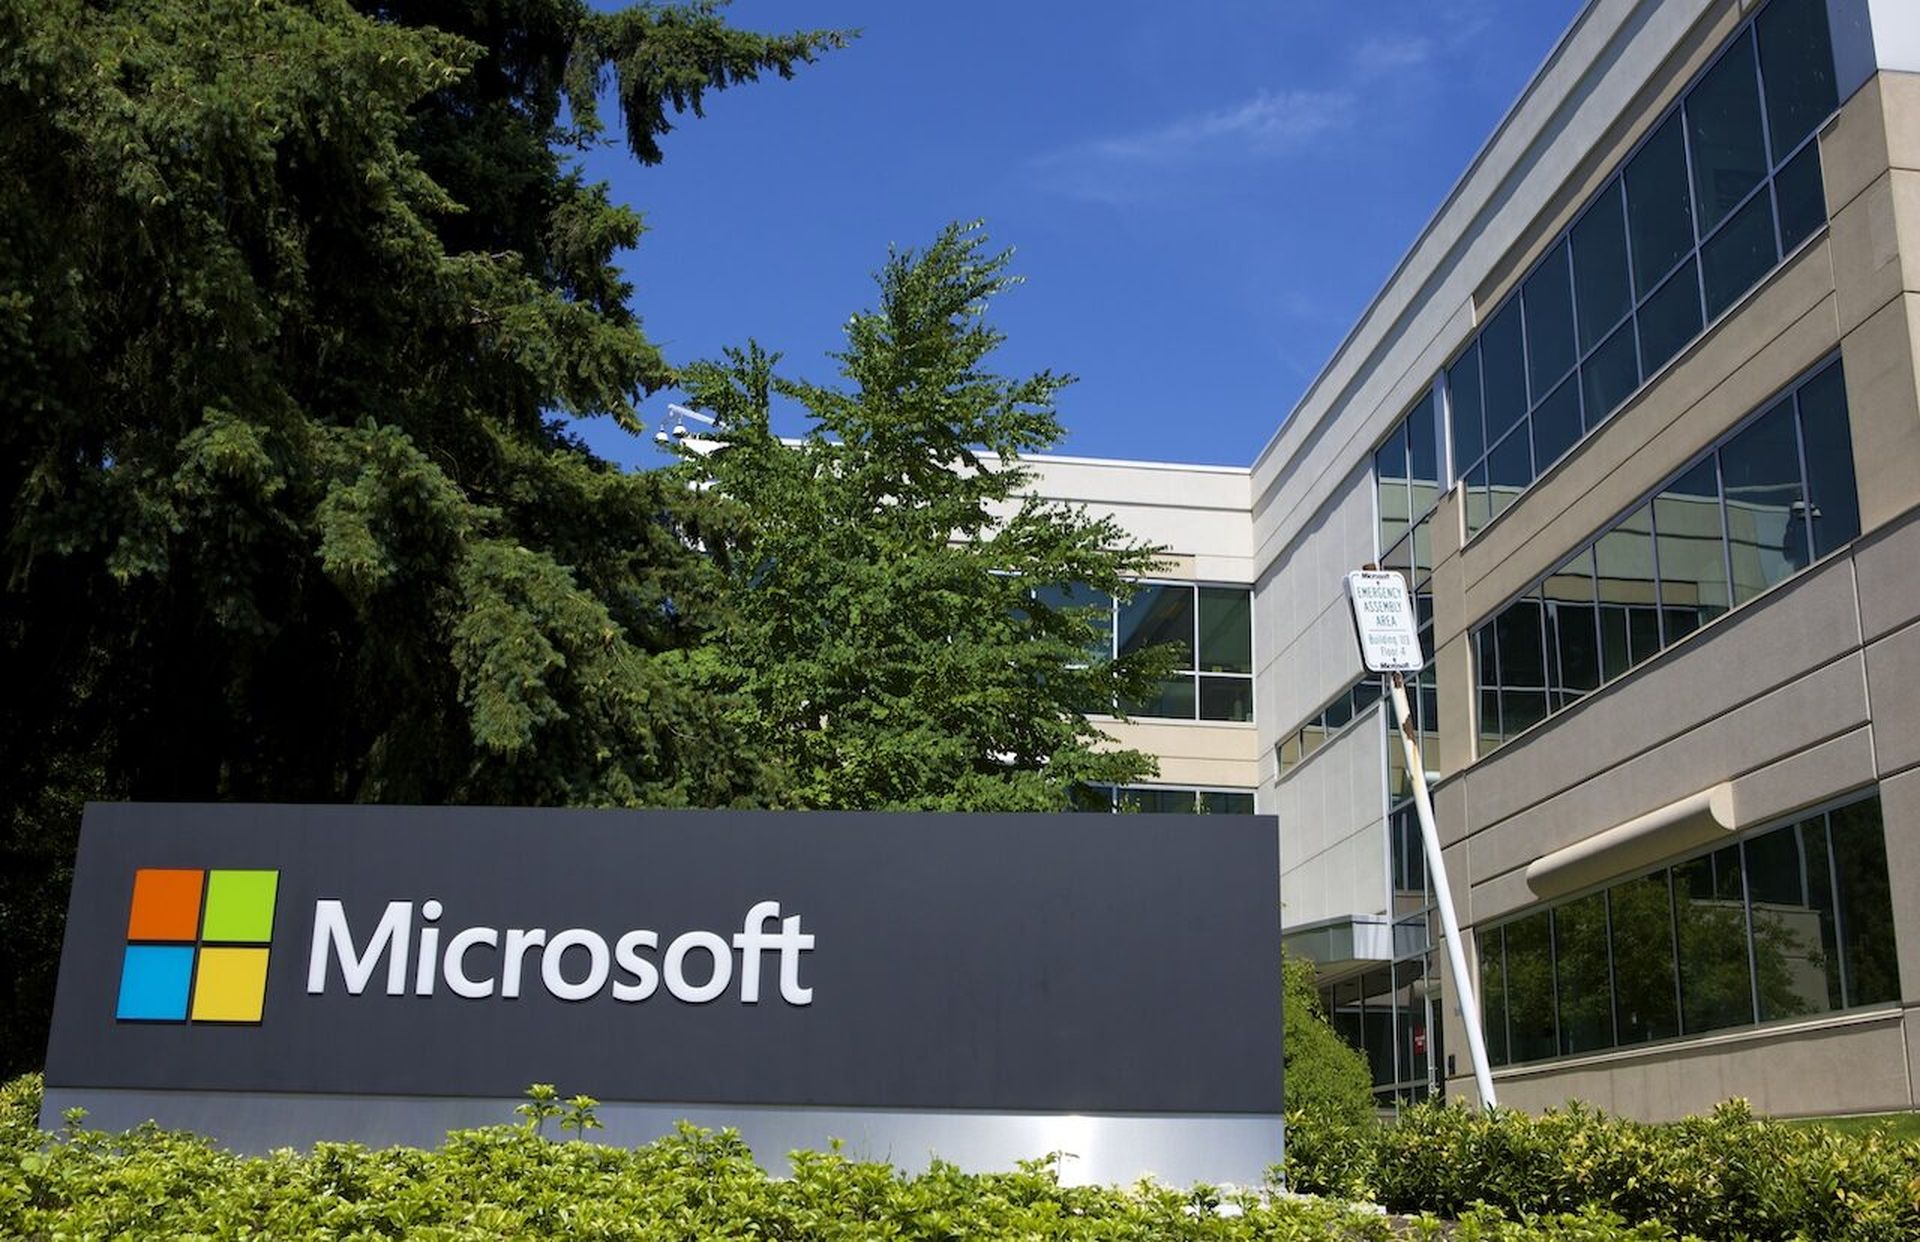 Today’s columnist, Perry Carpenter of KnowBe4, says hackers leverage the “Halo Effect” to impersonate reputable brands like Microsoft. (Stephen Brashear/Getty Images)